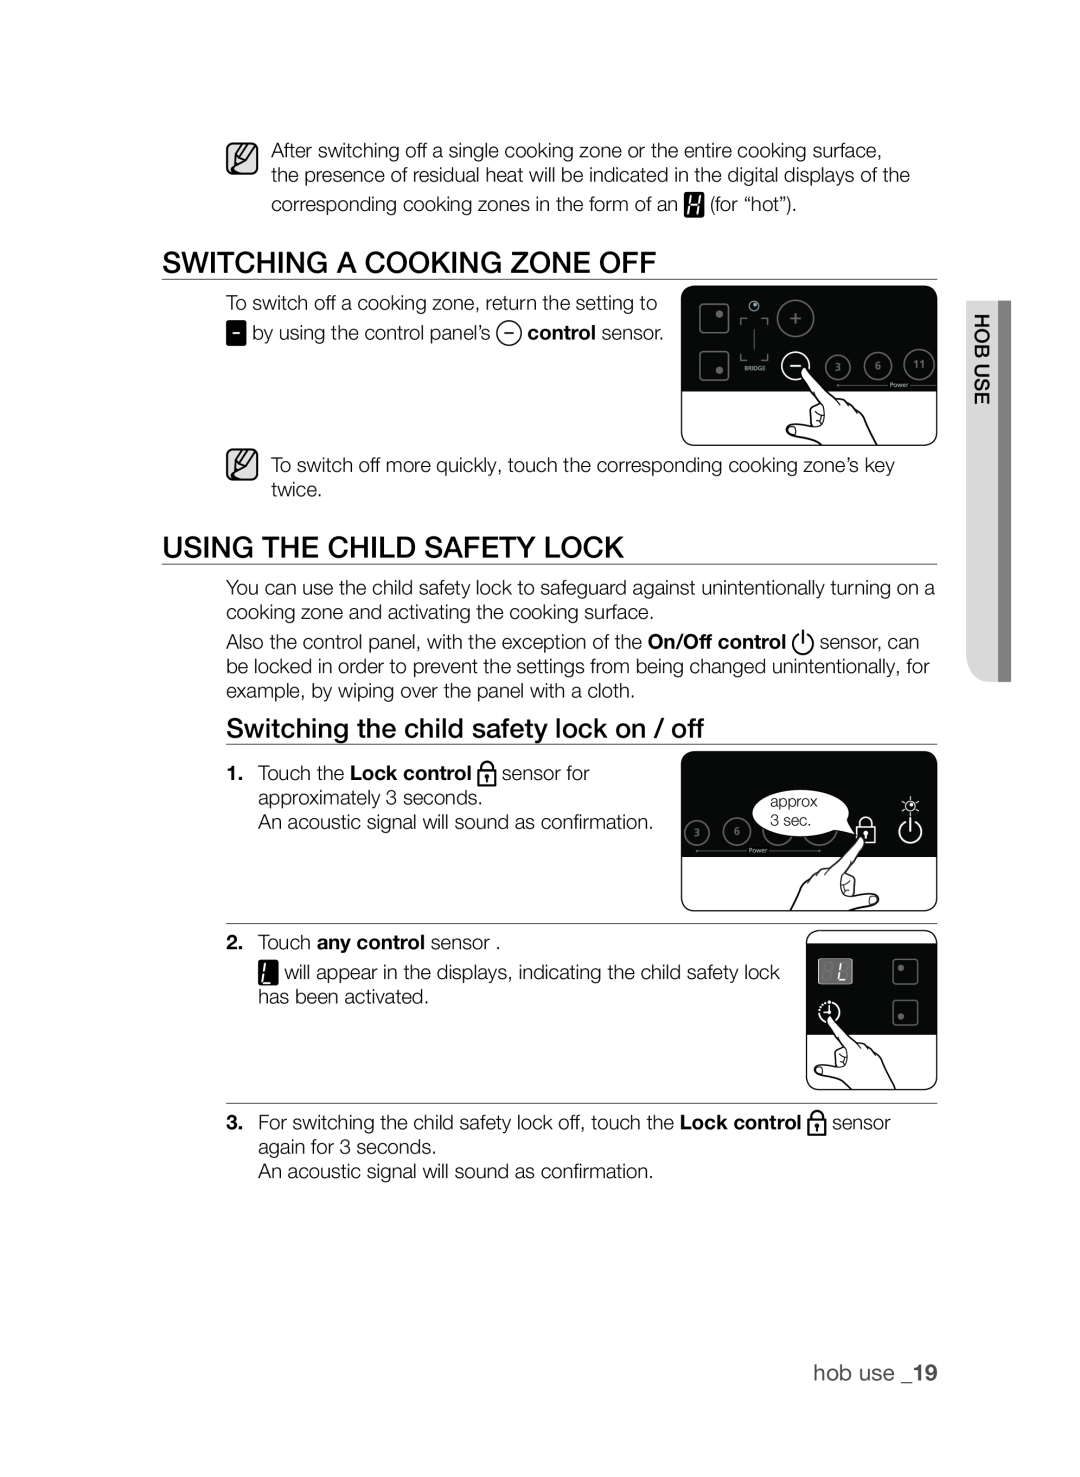 Samsung CTI613GI swITChInG a CookInG zone off, usInG The ChIld safeTy loCk, switching the child safety lock on / off 